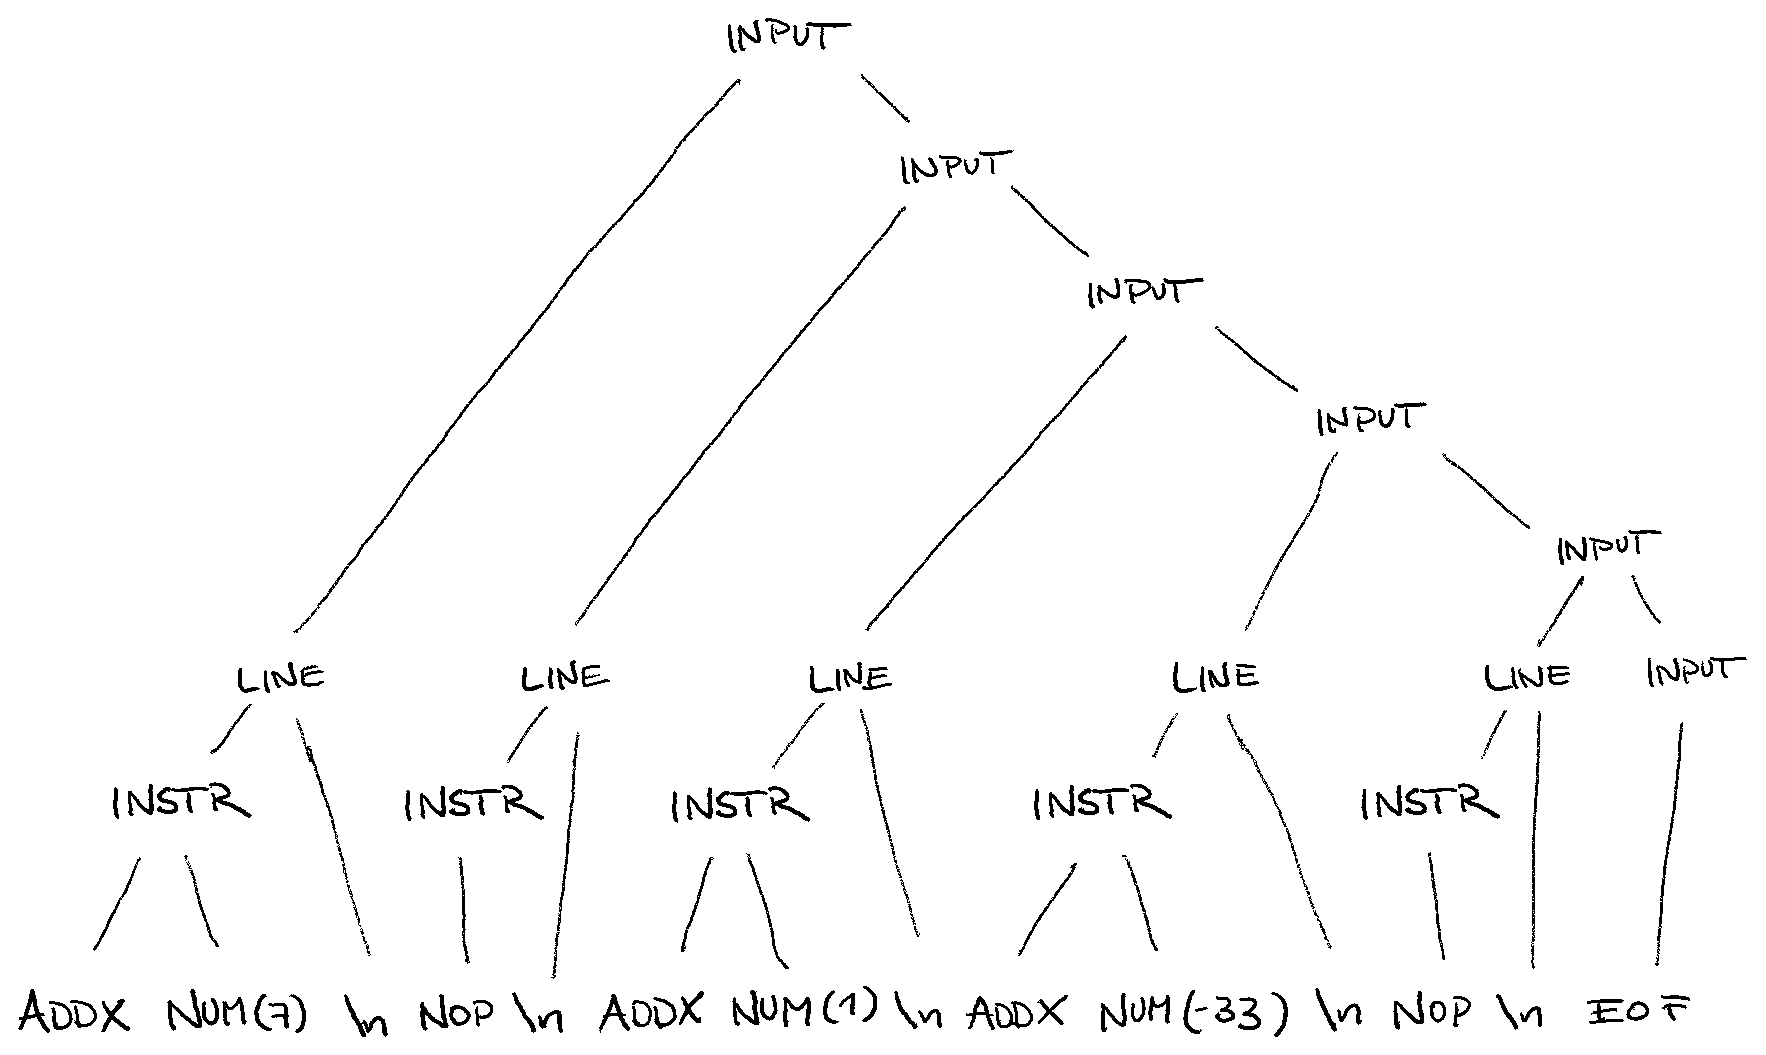 The resulting parse tree